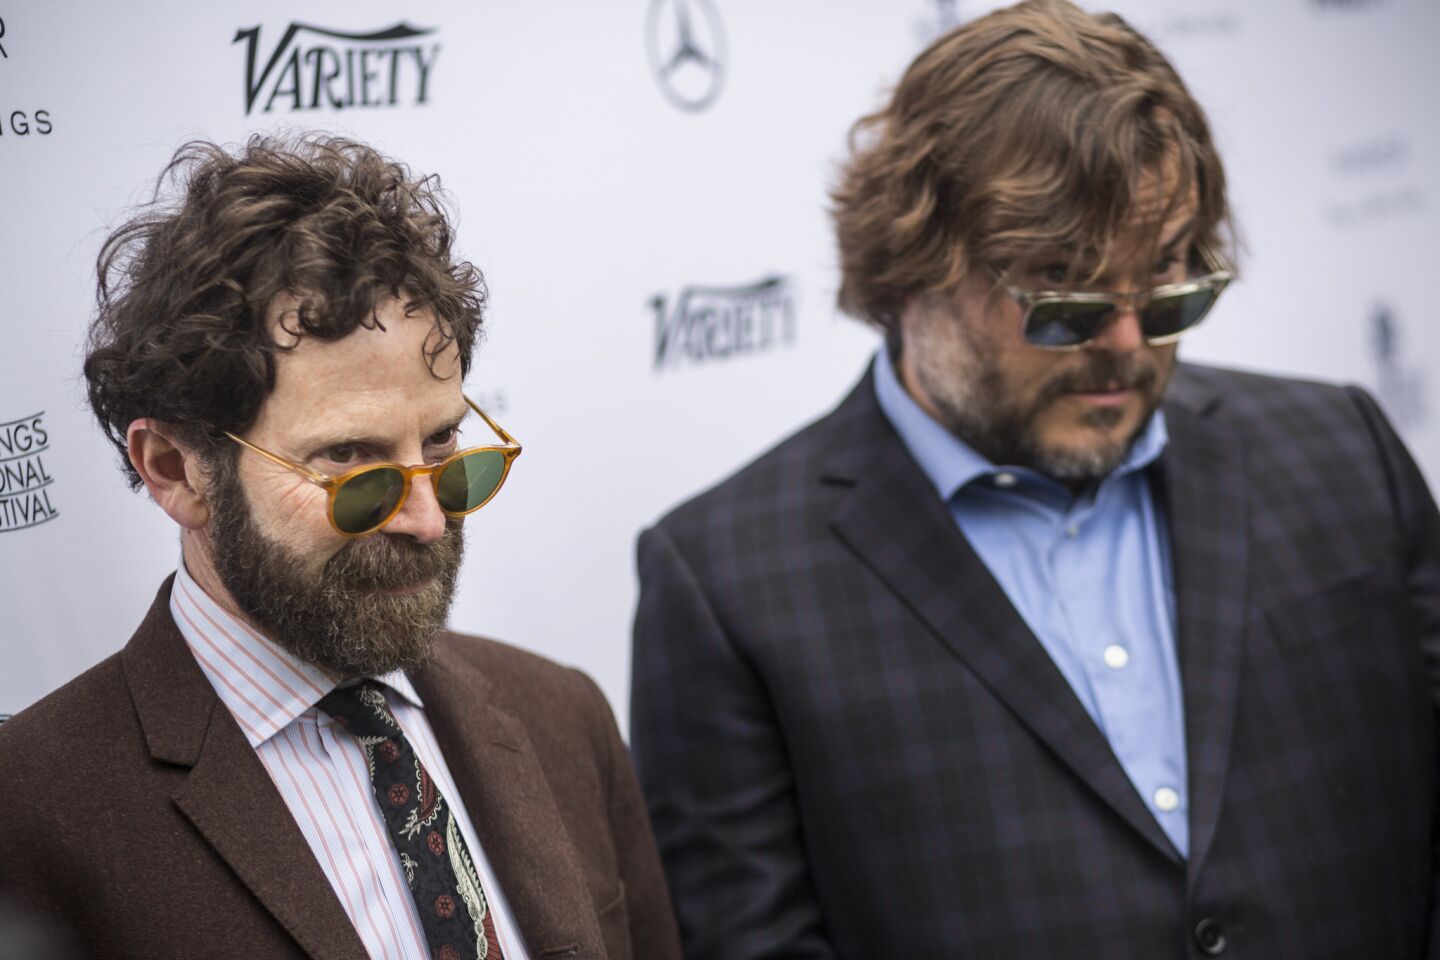 PALM SPRINGS, CA--JANUARY 03, 2016-- Director Charlie Kaugman, left and Actor Jack Black are photographed before the start of the Variety magazine luncheon, at the 2016 Palm Springs International Film Festival, held at at the Parker Palm Springs hotel, in Palm Springs, CA, Jan. 03, 2016. Black presented Kaufman with the Variety Creative Impact in Directing Award presented by Mercedes-Benz. (Jay L. Clendenin / Los Angeles Times)